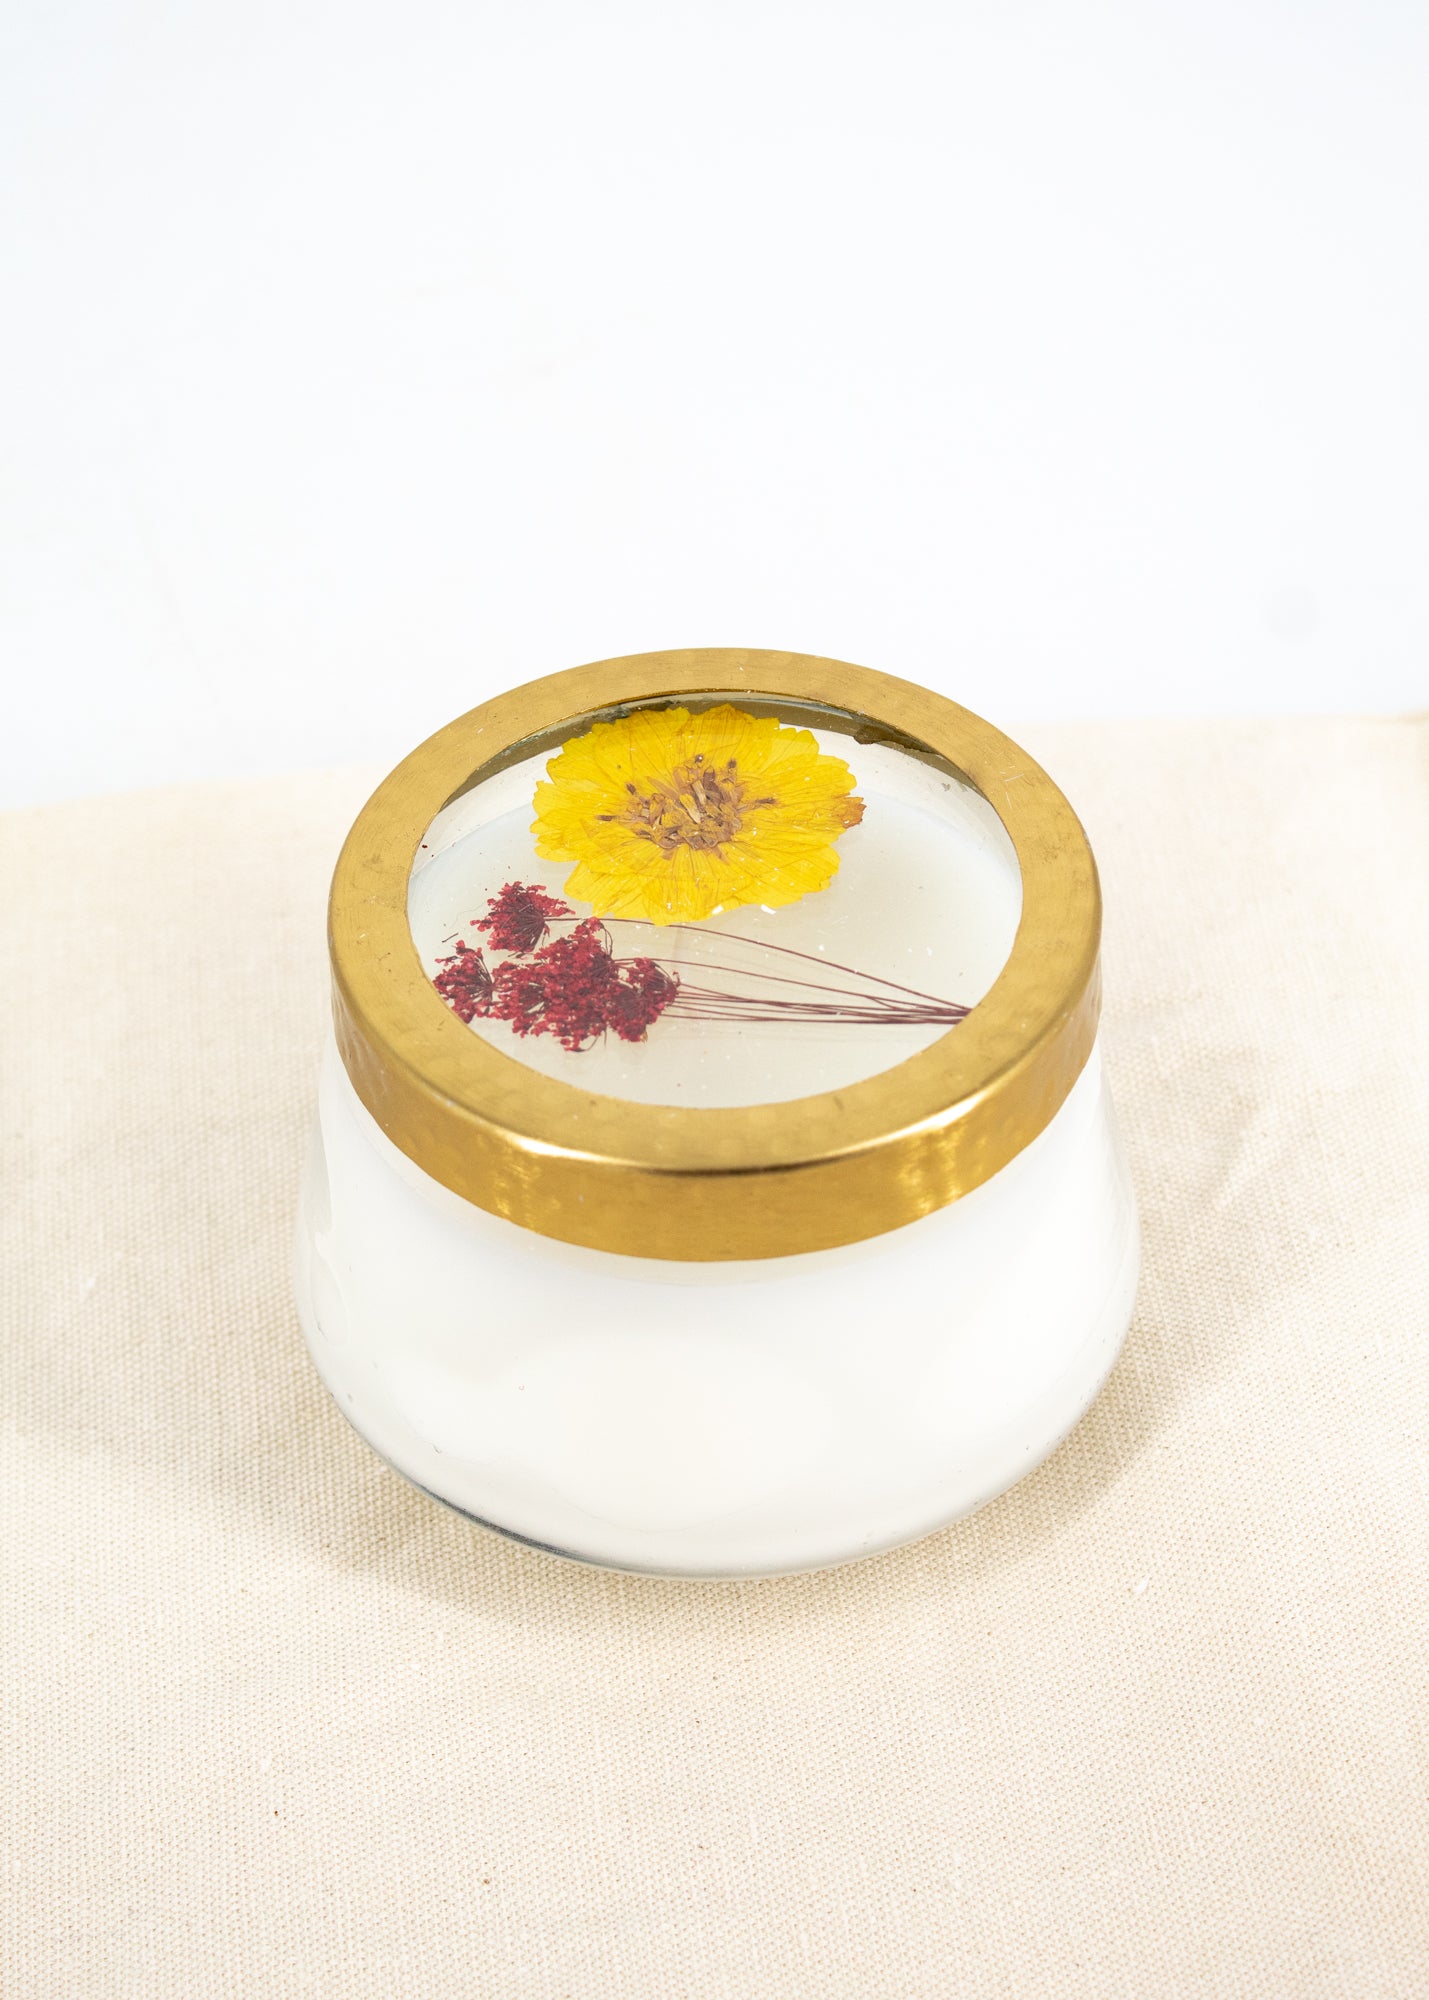 Pressed Flower Candle - Peony and Pomelo -  - Rosy Rings - Wild Lark